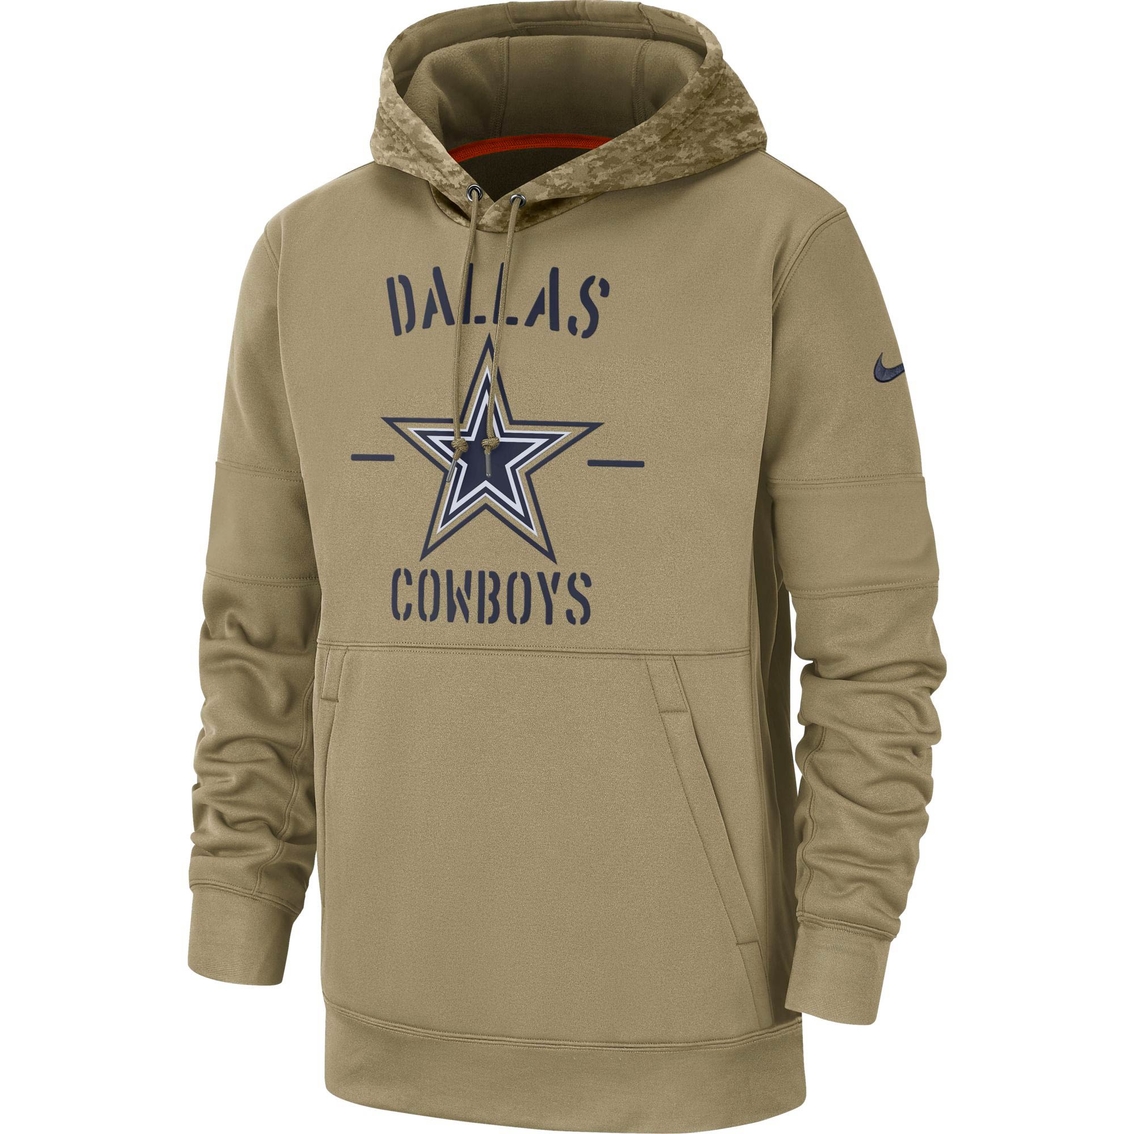 Nike Nfl Dallas Cowboys Salute To Service Therma Hoodie